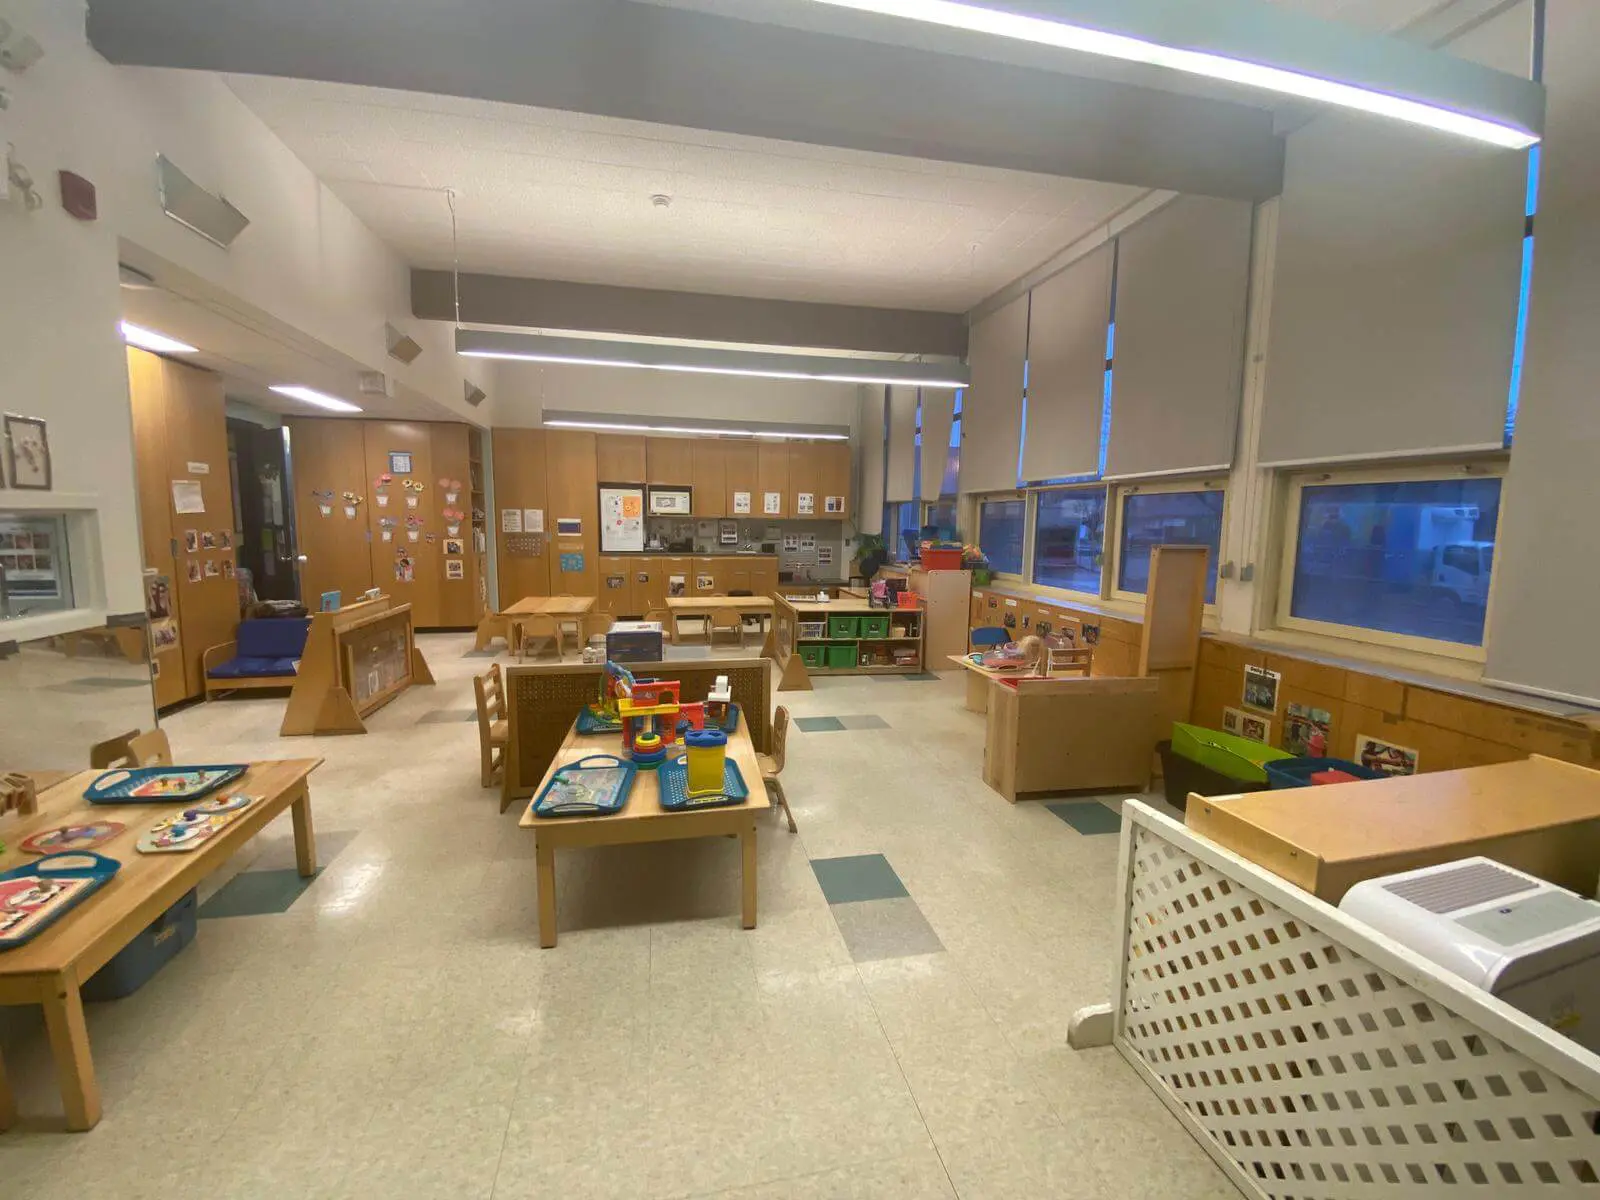 View of preschool from inside of the room